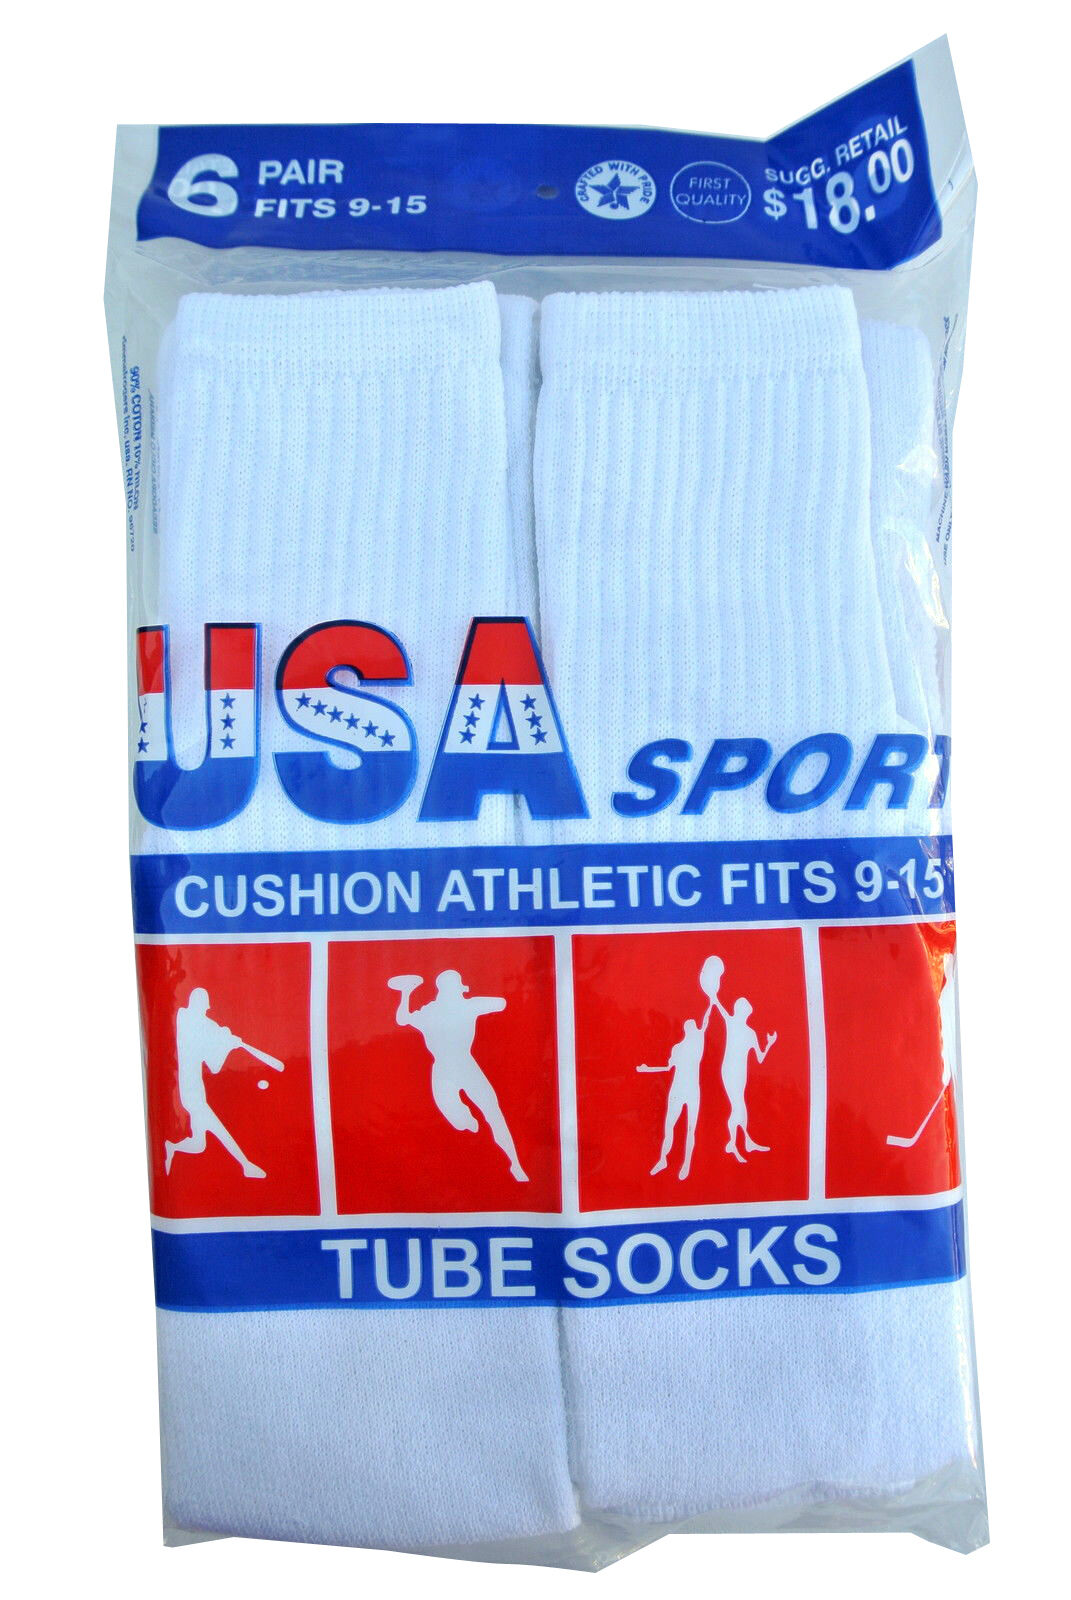 WOMEN'S COTTON TUBE SOCKS, REFEREE STYLE, SIZE 9-15 SOLID WHITE